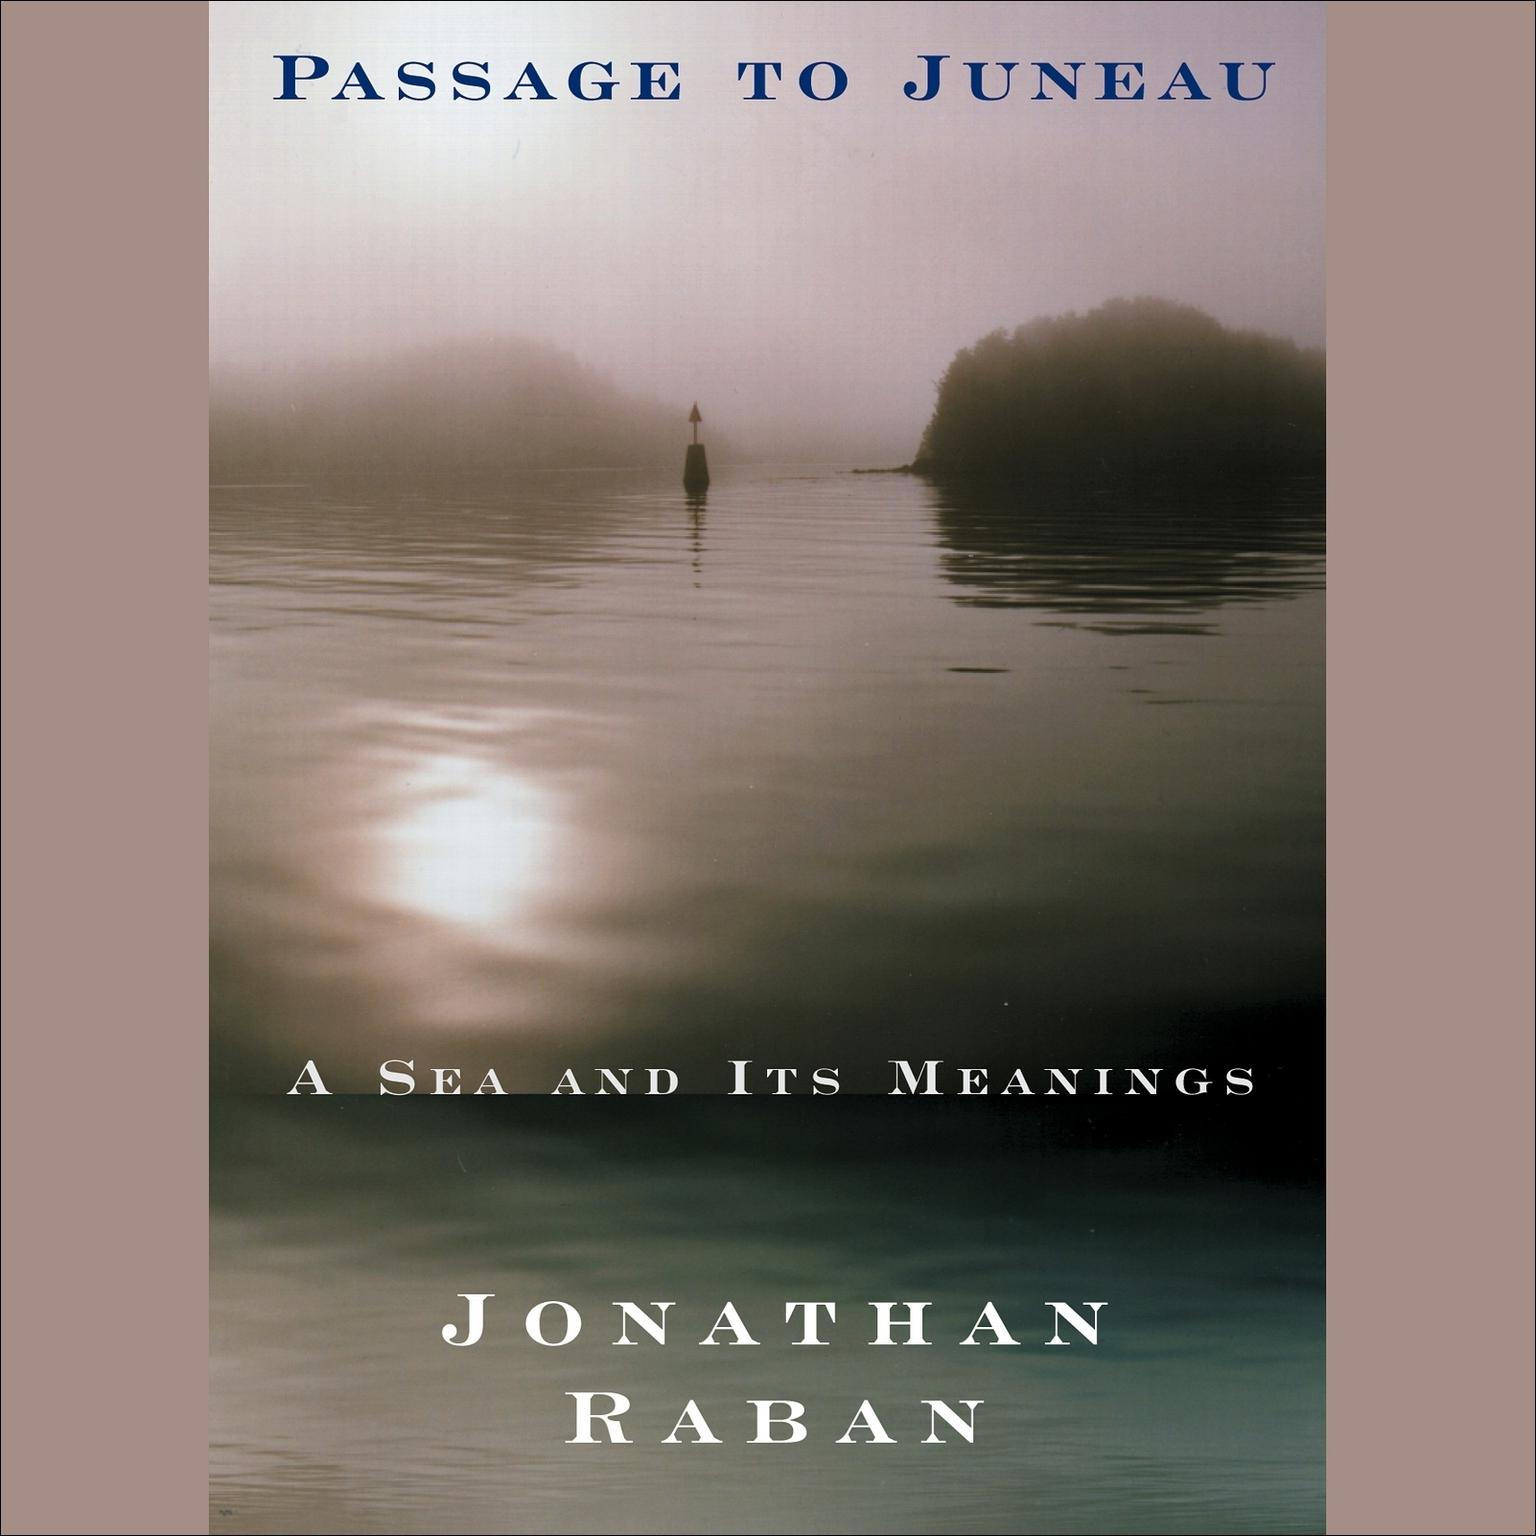 Passage to Juneau (Abridged): A Sea and Its Meanings Audiobook, by Jonathan Raban